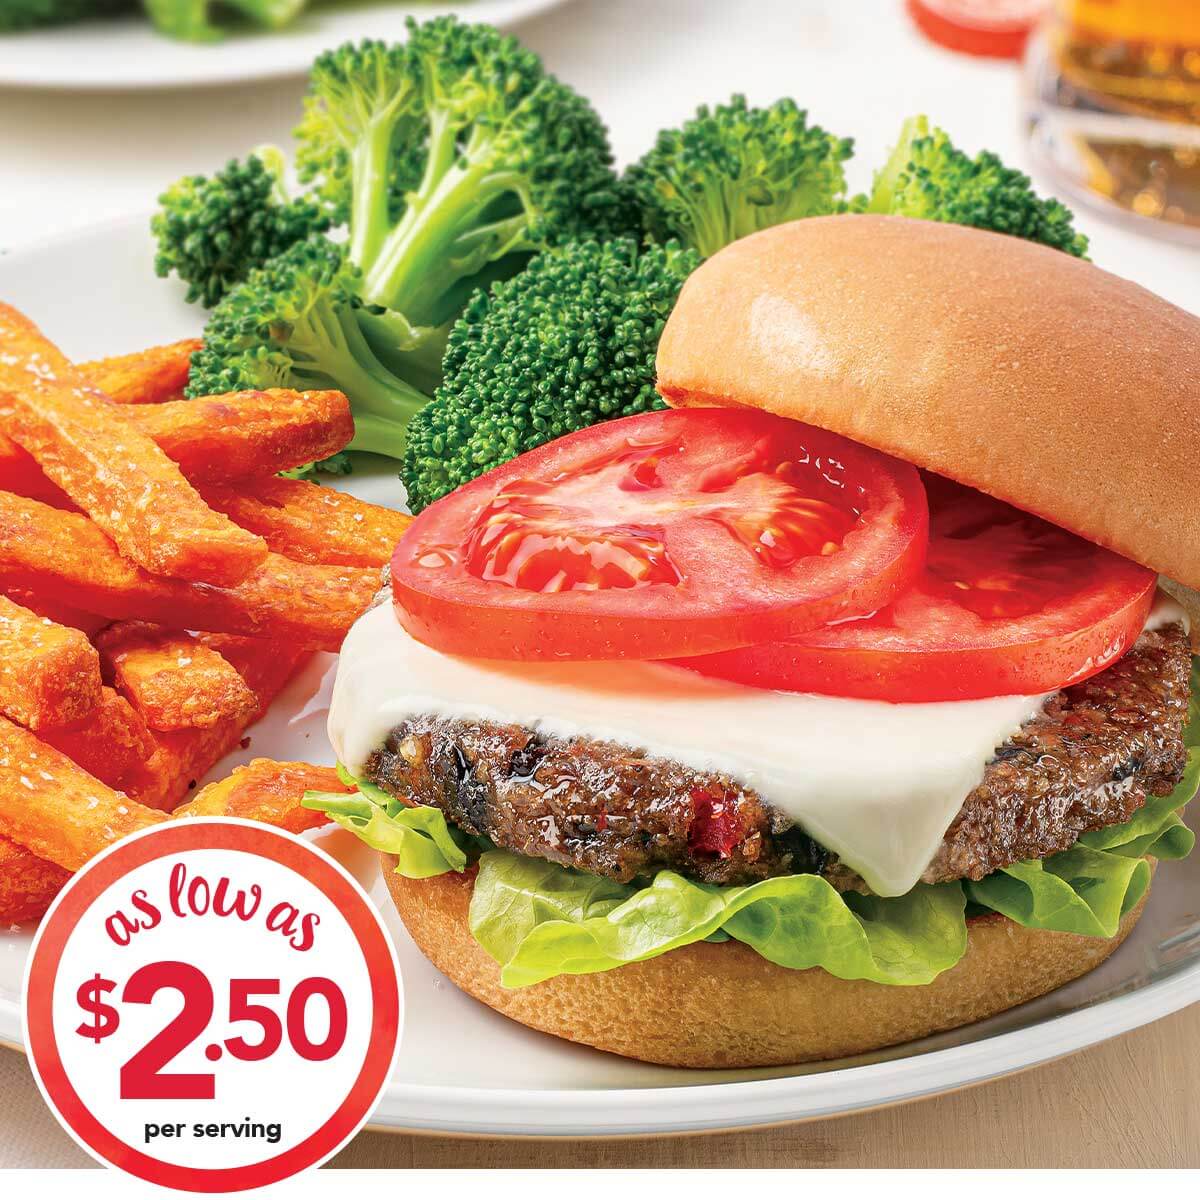 Veggie Burgers with Sweet Potato Fries and Broccoli as low as $2.50 per serving